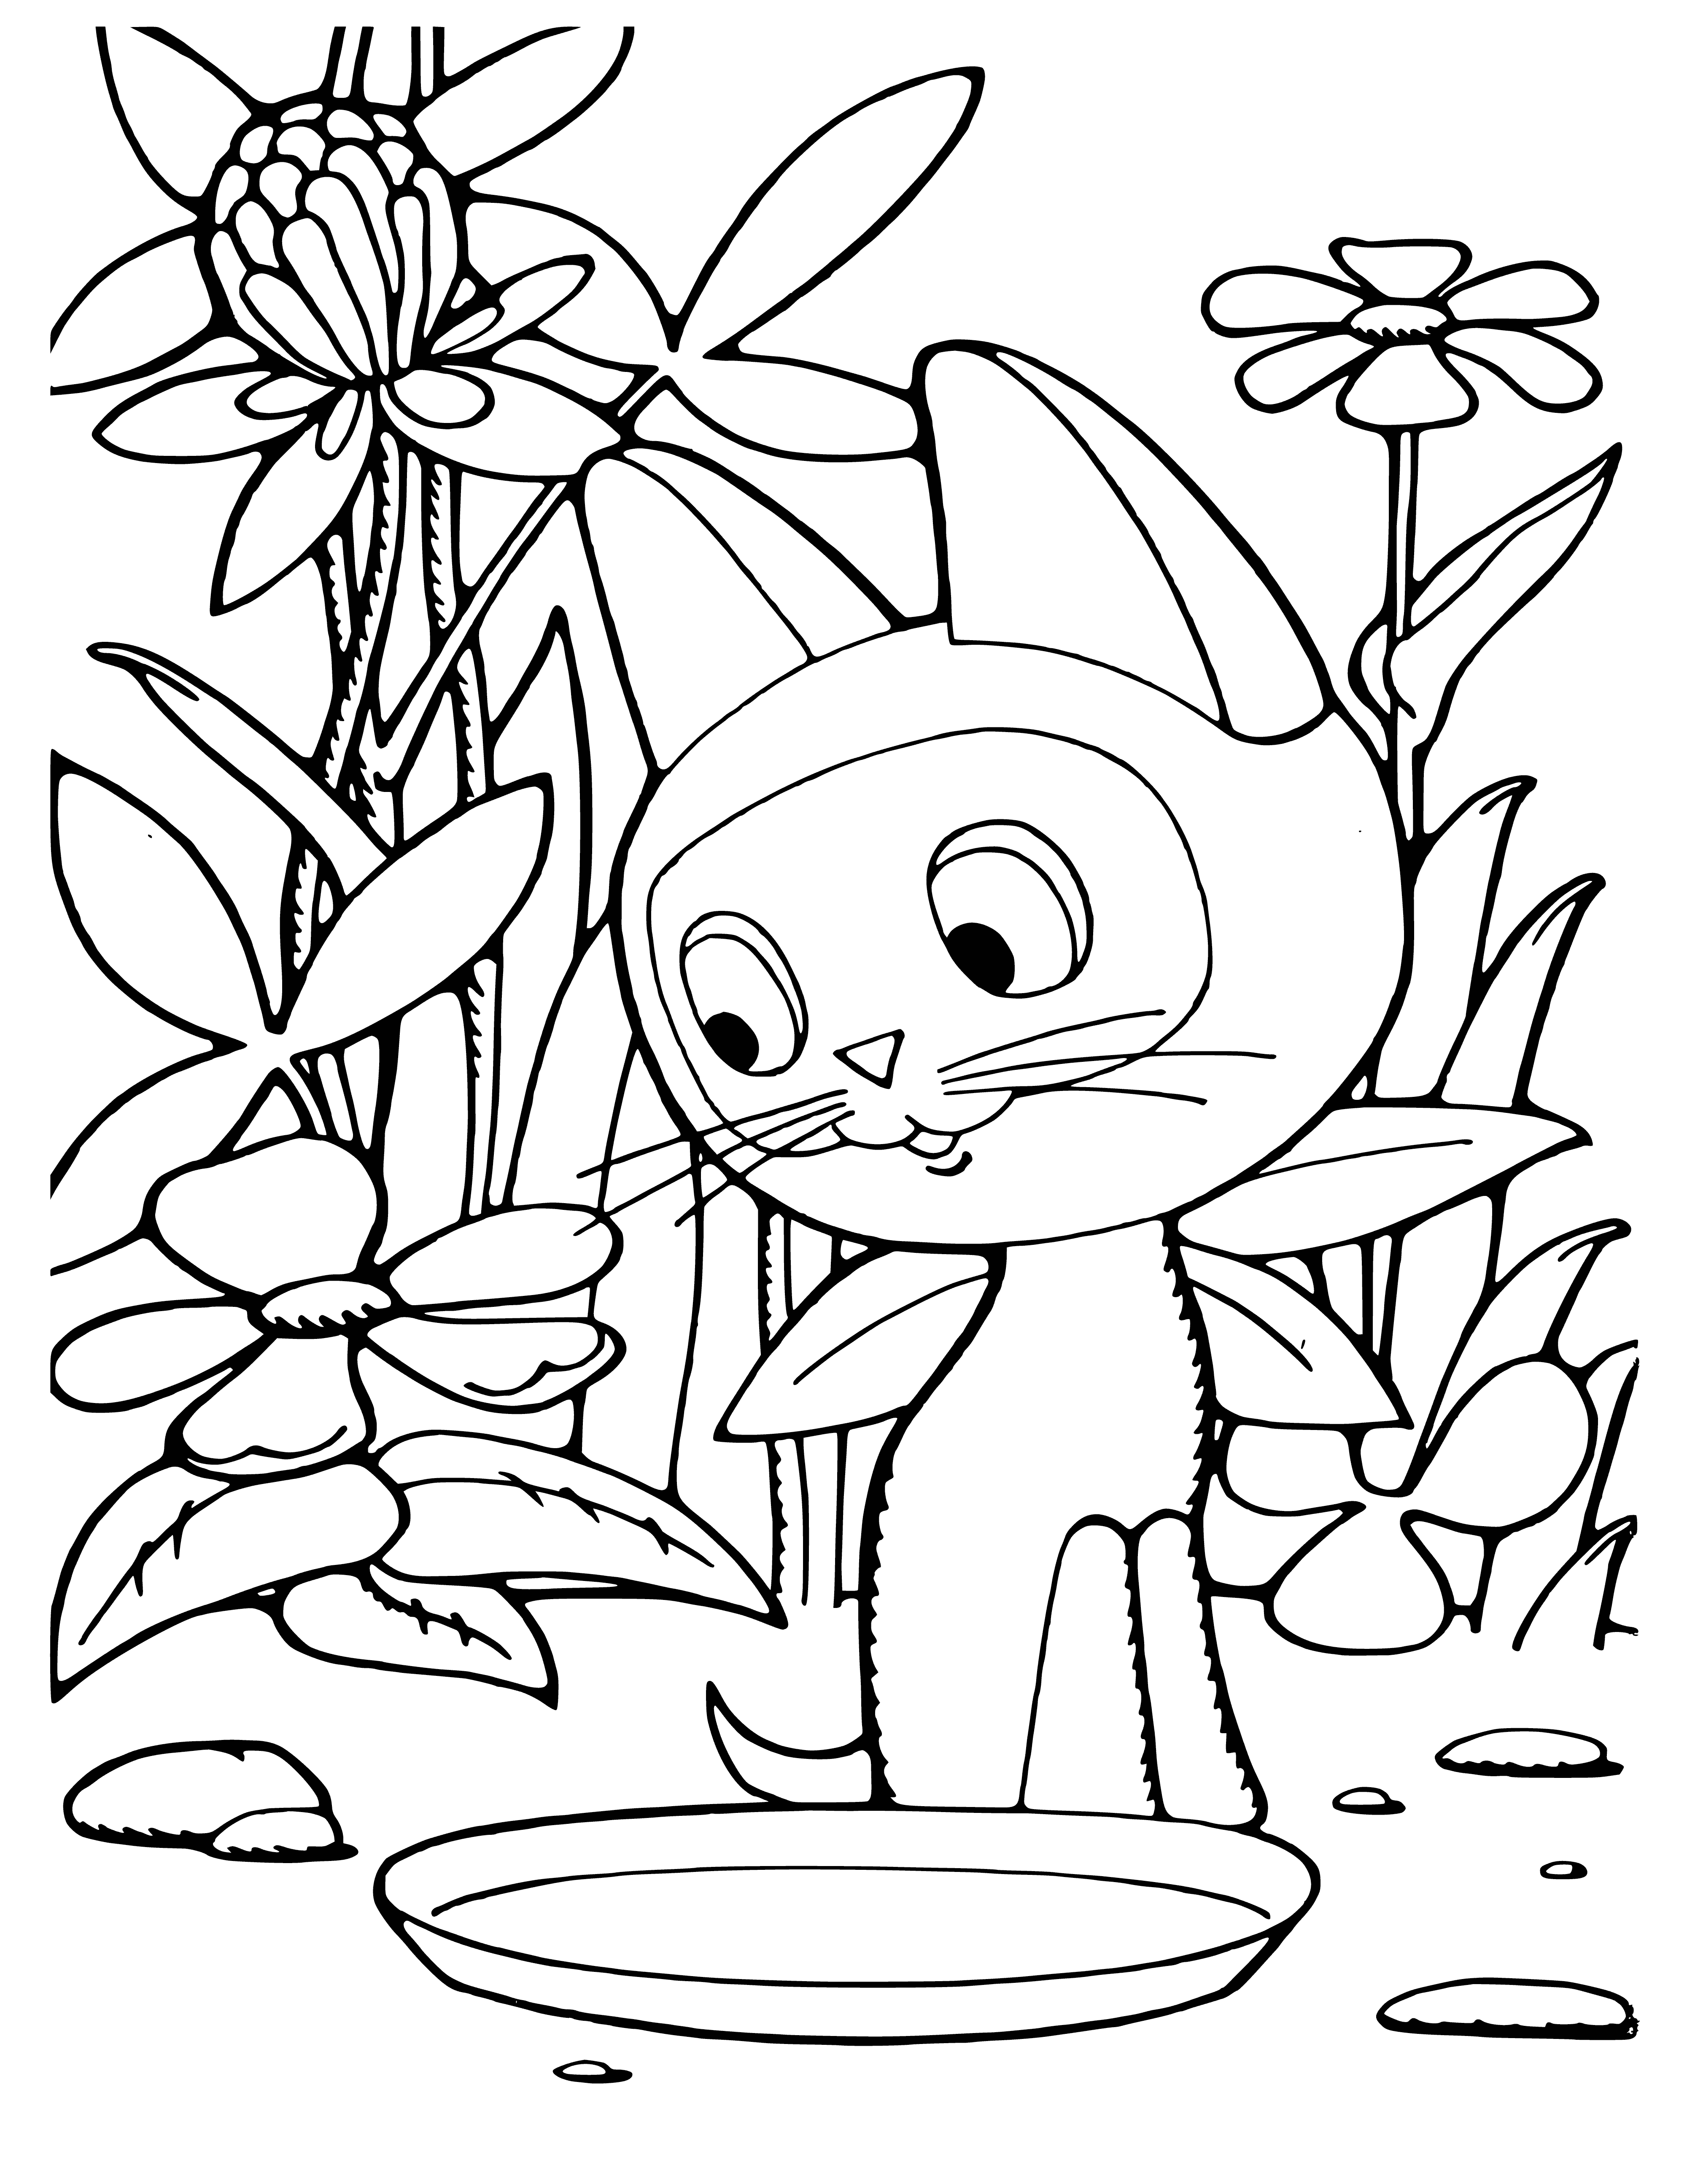 coloring page: Kitten Woof is a playful explorer who loves to play with her toys. She's a beautiful long-furred kitten.